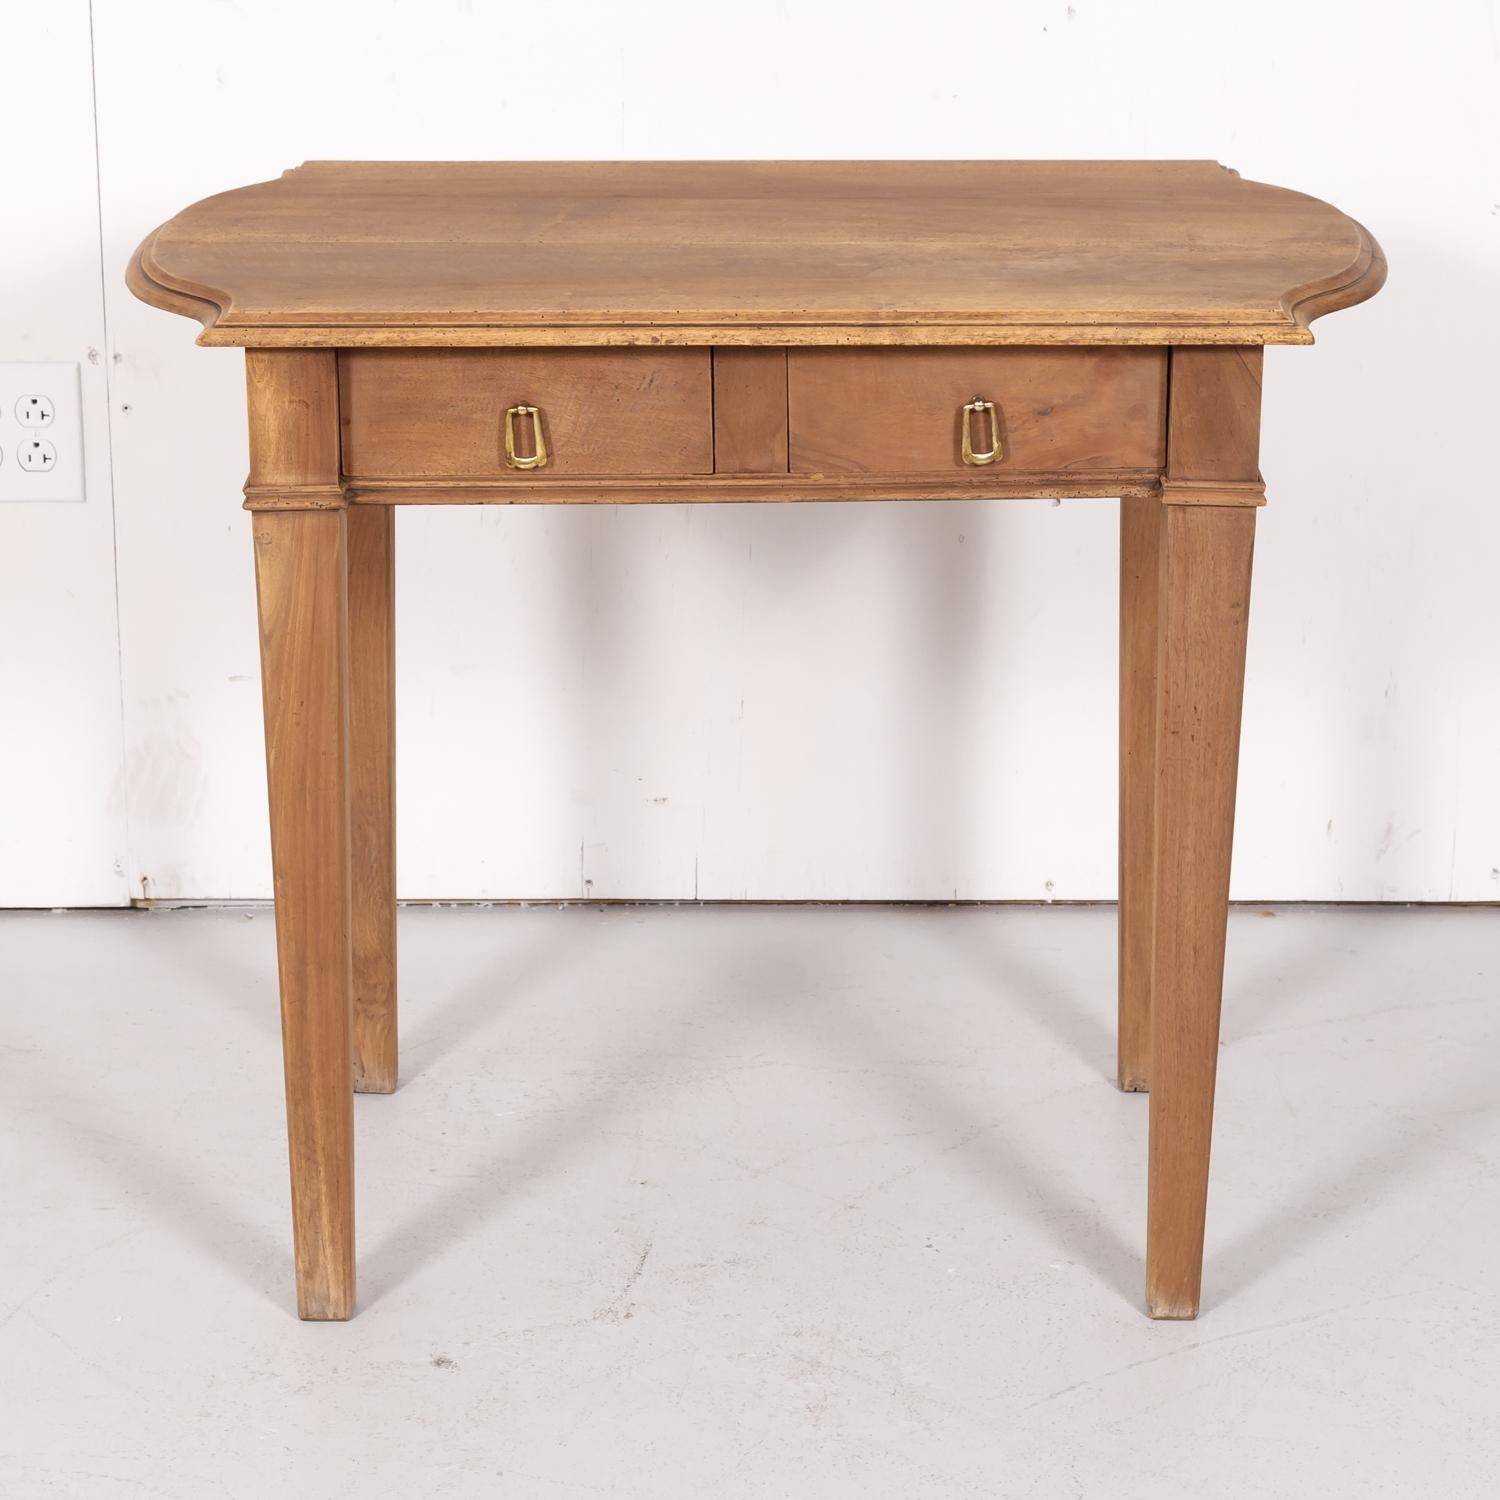 A 19th century French Louis XVI style side table handcrafted in Lyon of solid walnut, circa 1880s, having a bleached finish with a shaped top over two drawers. Raised on tapered legs.

Dimensions:
H 29.5